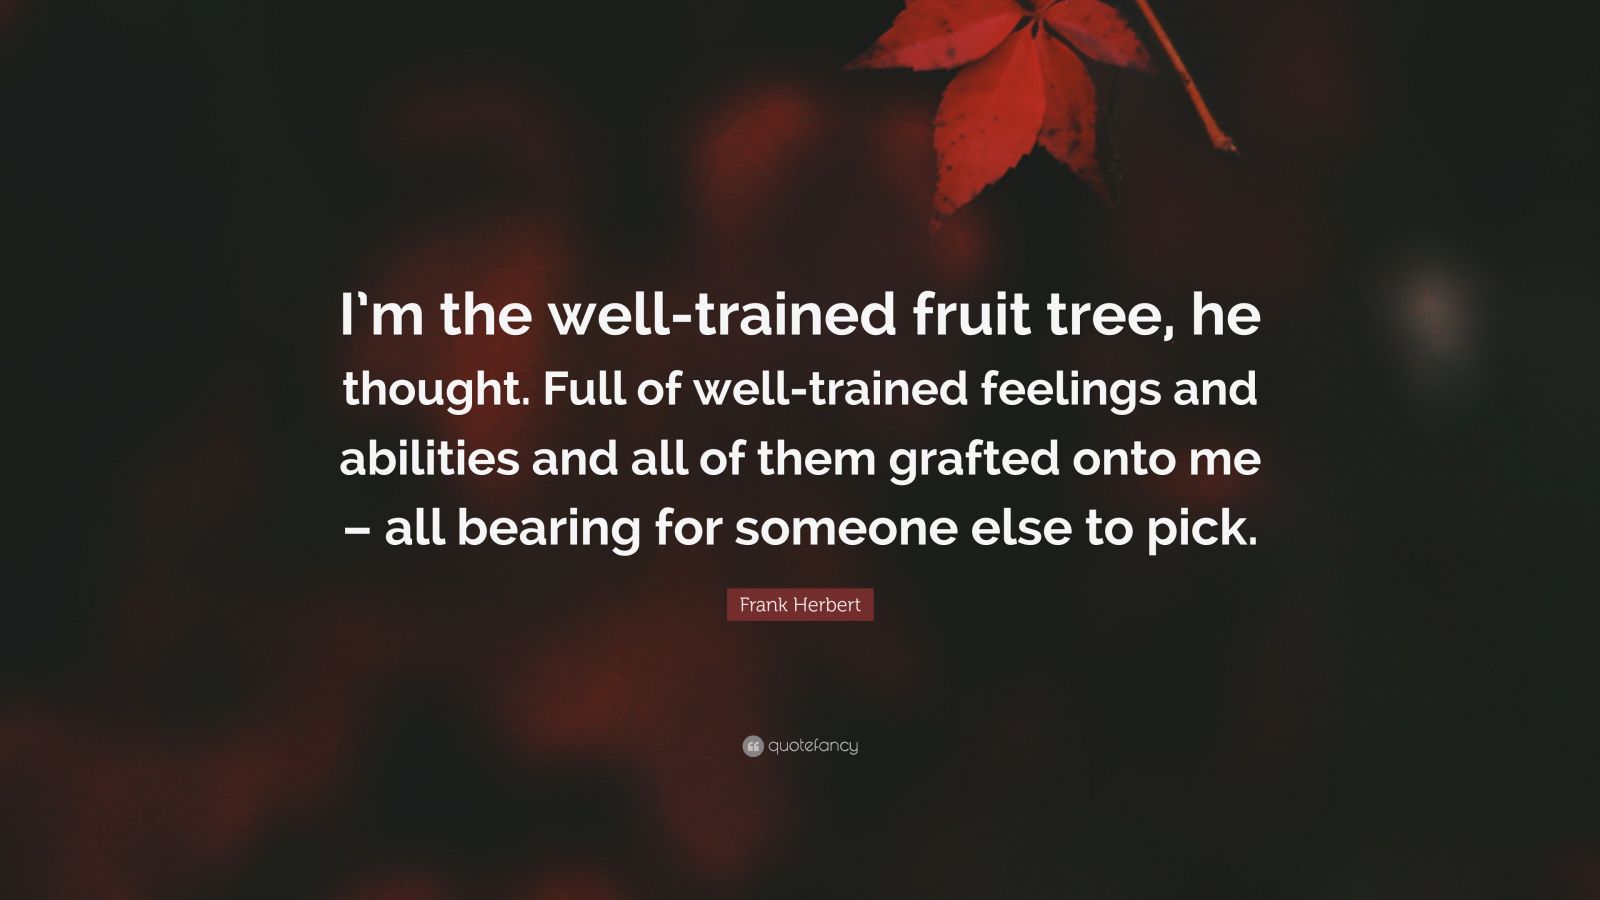 Frank Herbert Quote: “I'm the well-trained fruit tree, he thought ...